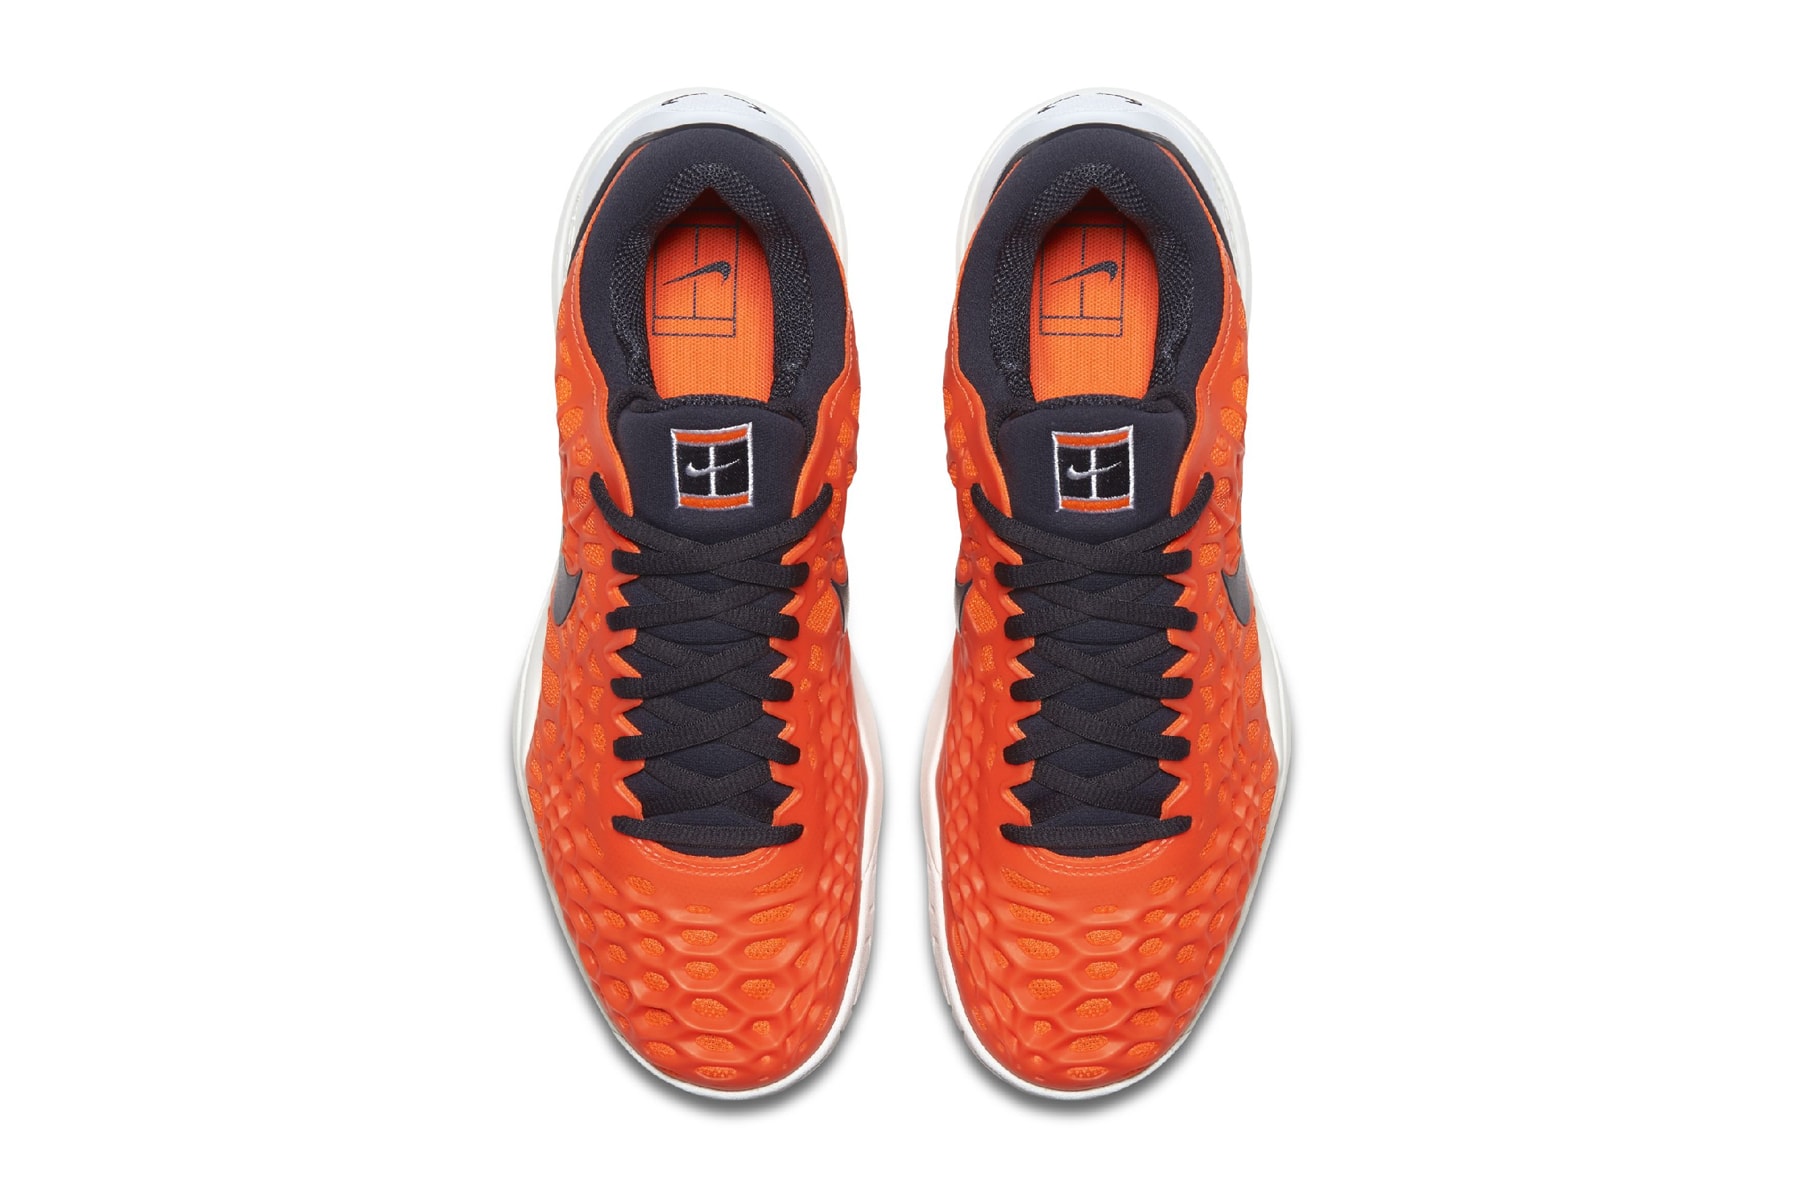 Nike Air Zoom Cage 3 "Hyper Crimson" first look sneaker colorway release date info purchase price